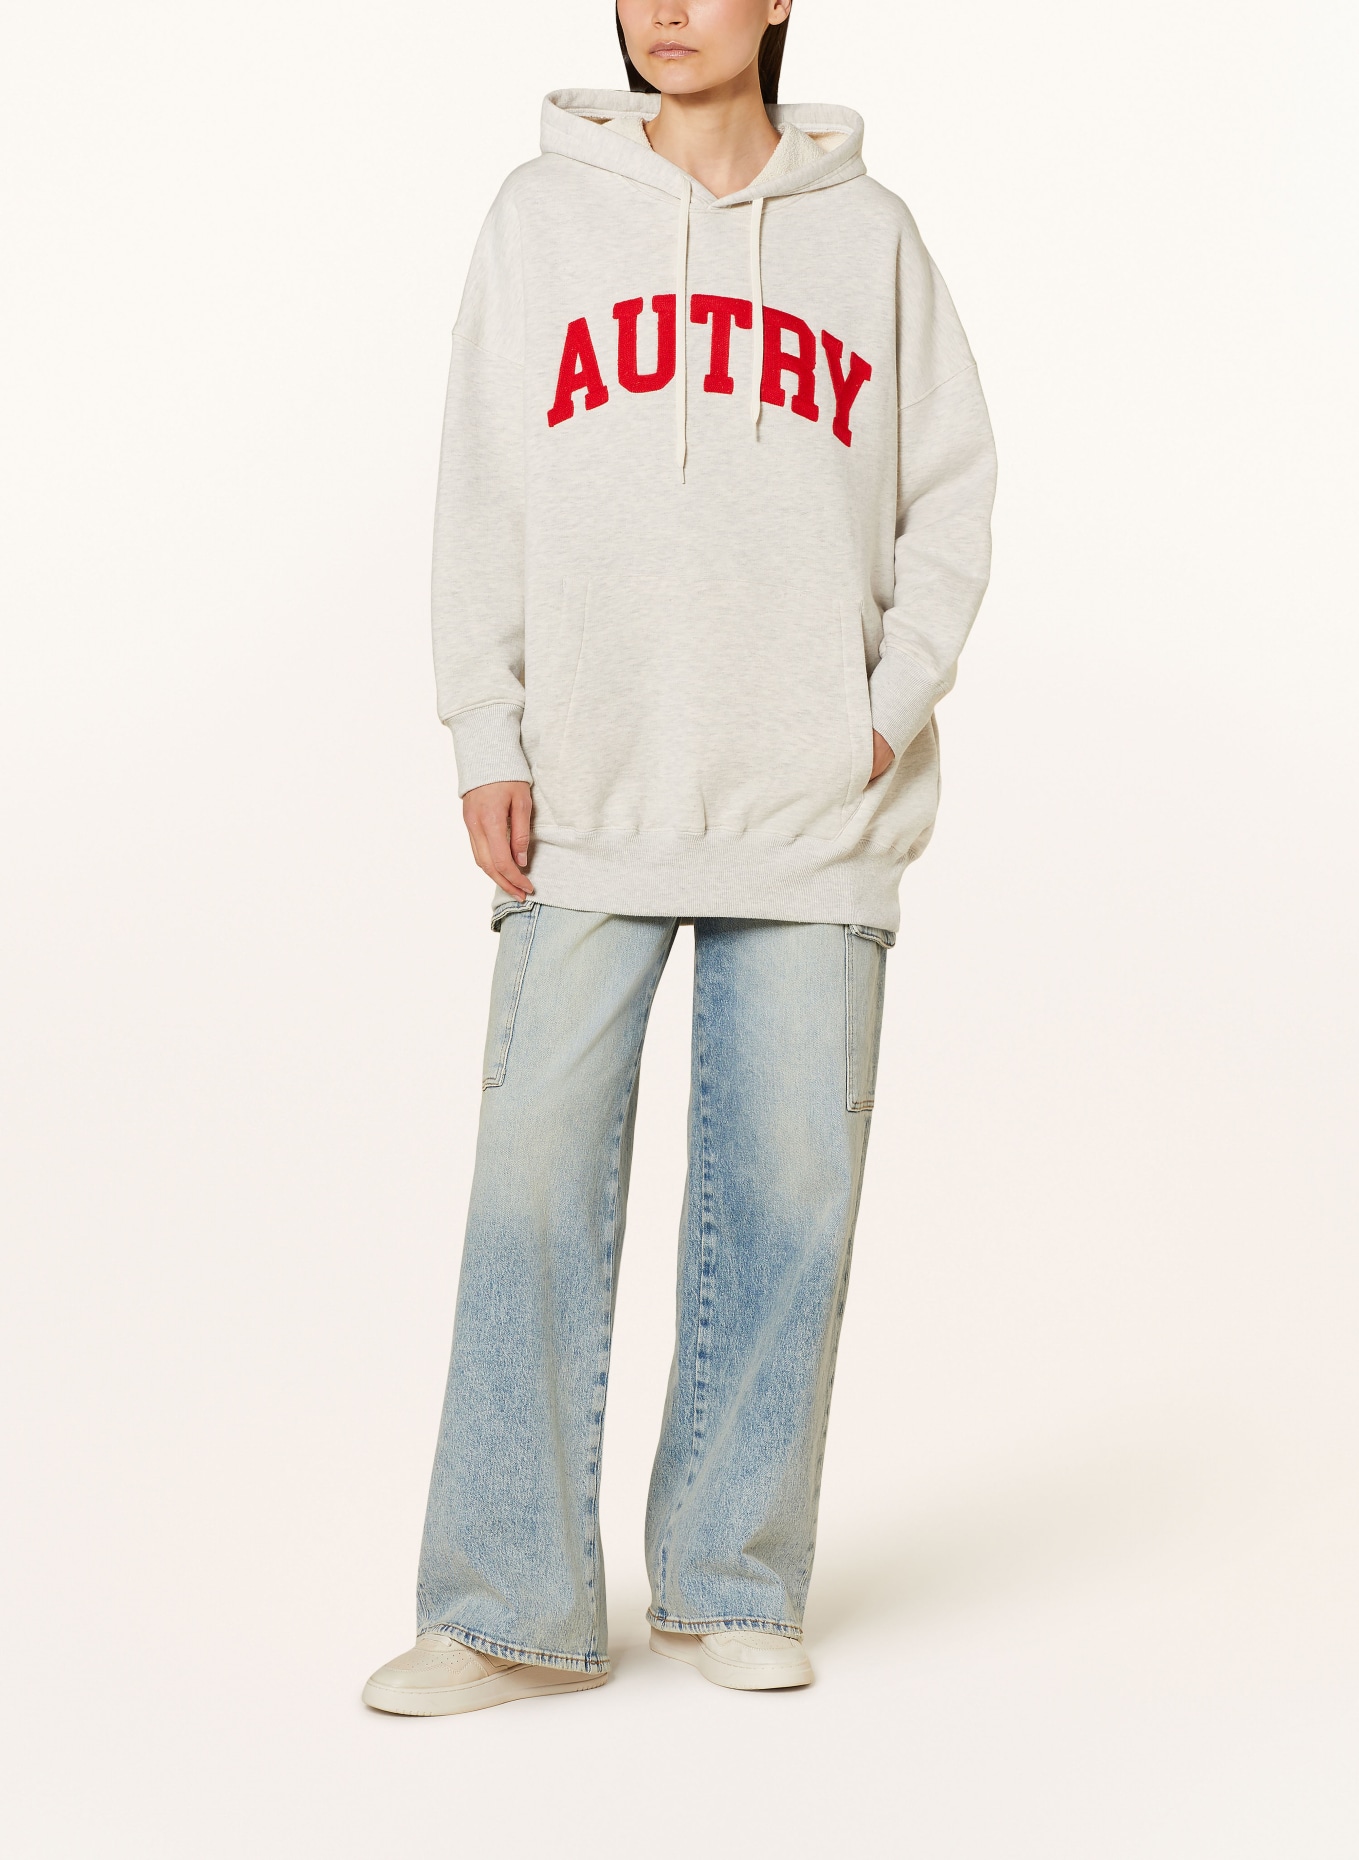 AUTRY Hoodie, Color: LIGHT GRAY (Image 2)